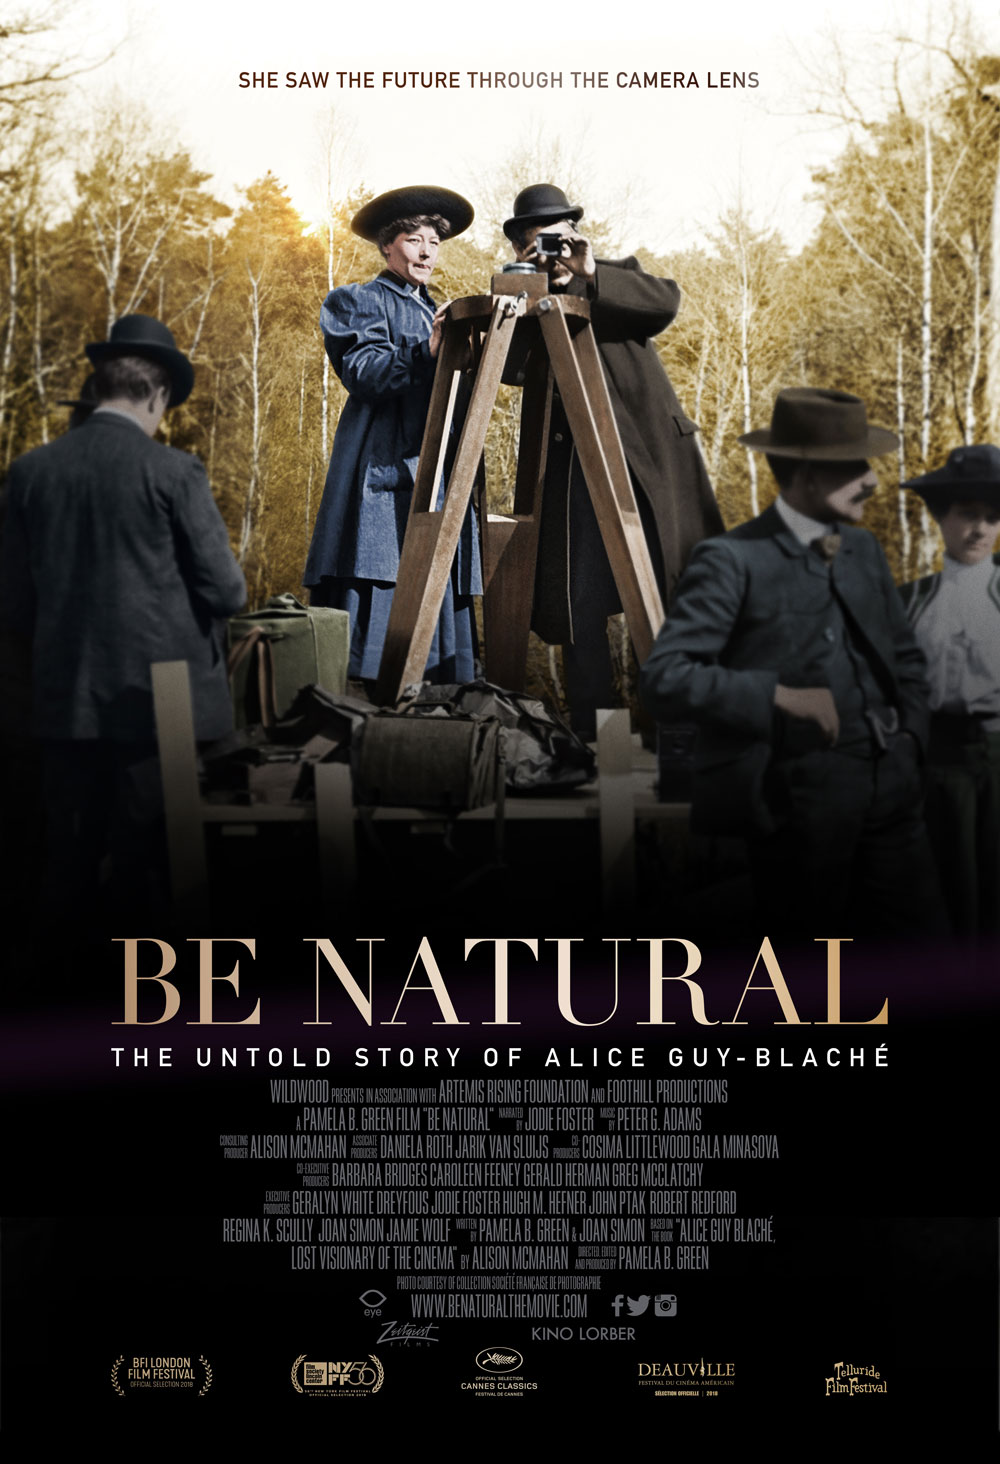 Be Natural: The Untold Story of Alice Guy-Blaché [DVD]